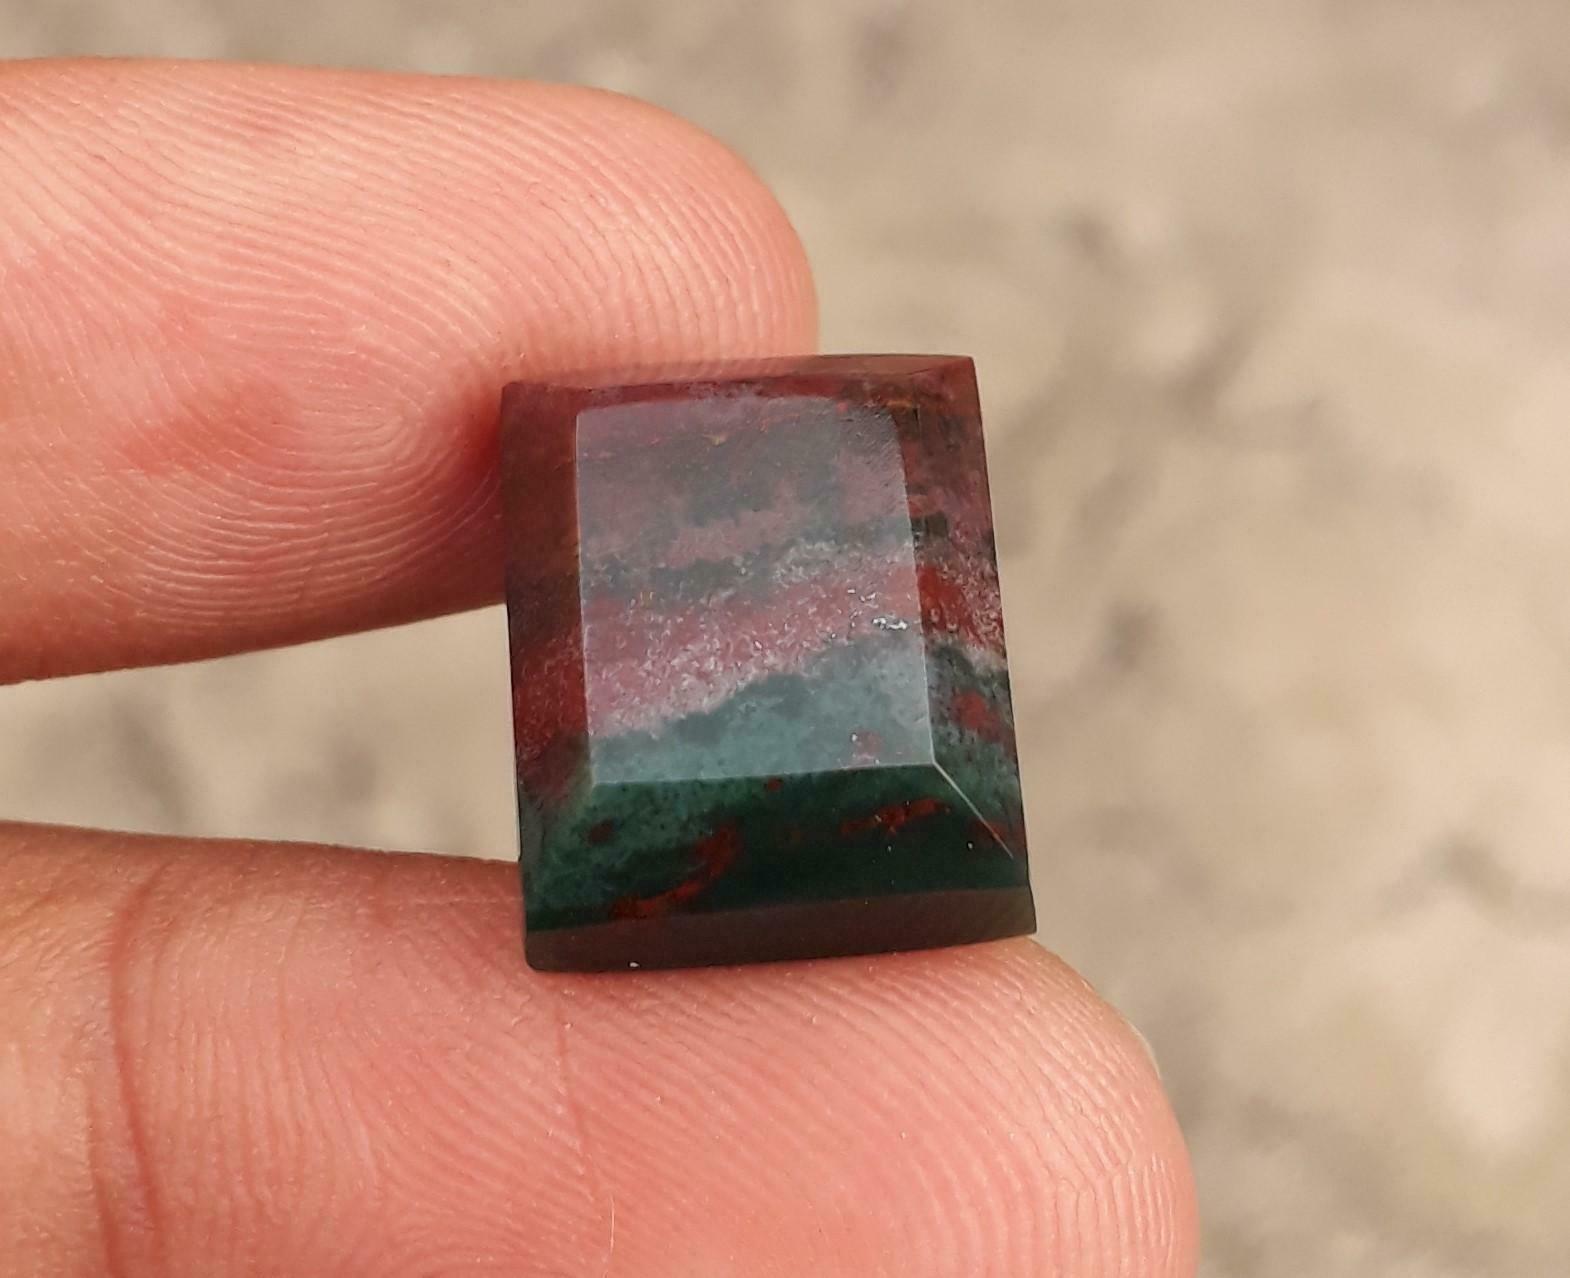 13.5ct Natural High Quality Blood Stone - Heliotrope -16x14mm